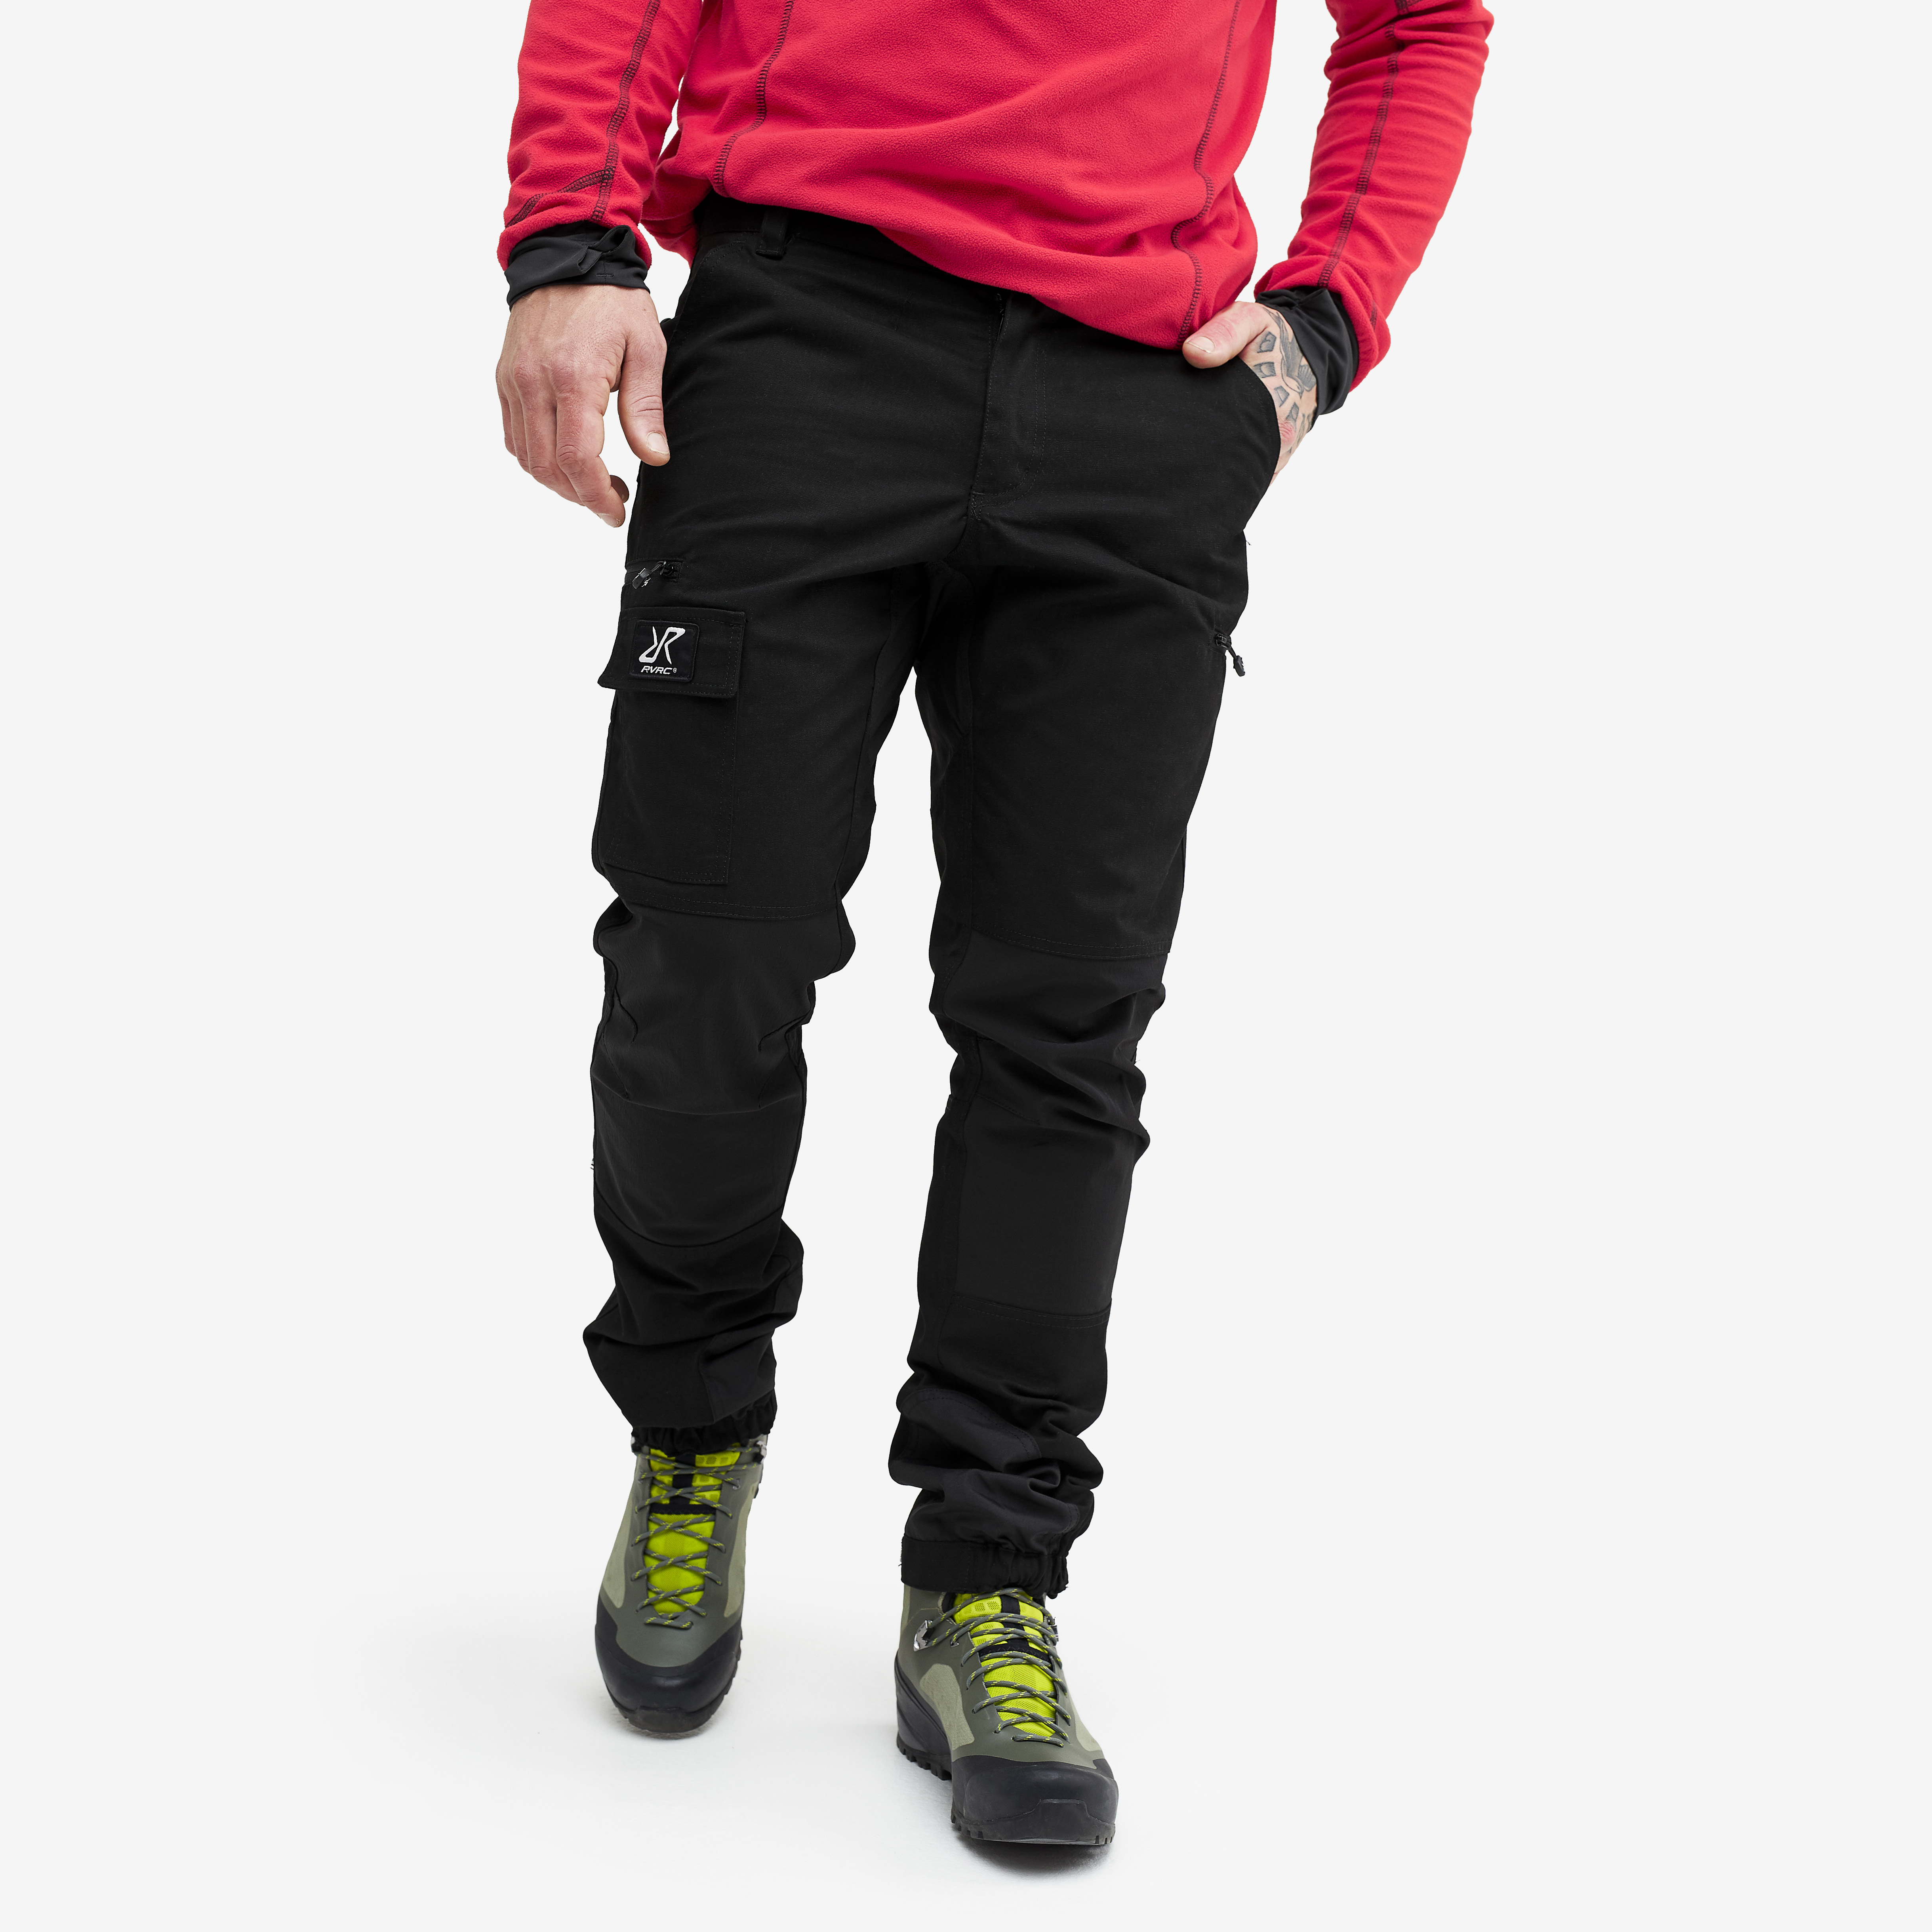 Nordwand outdoor pants for men in black